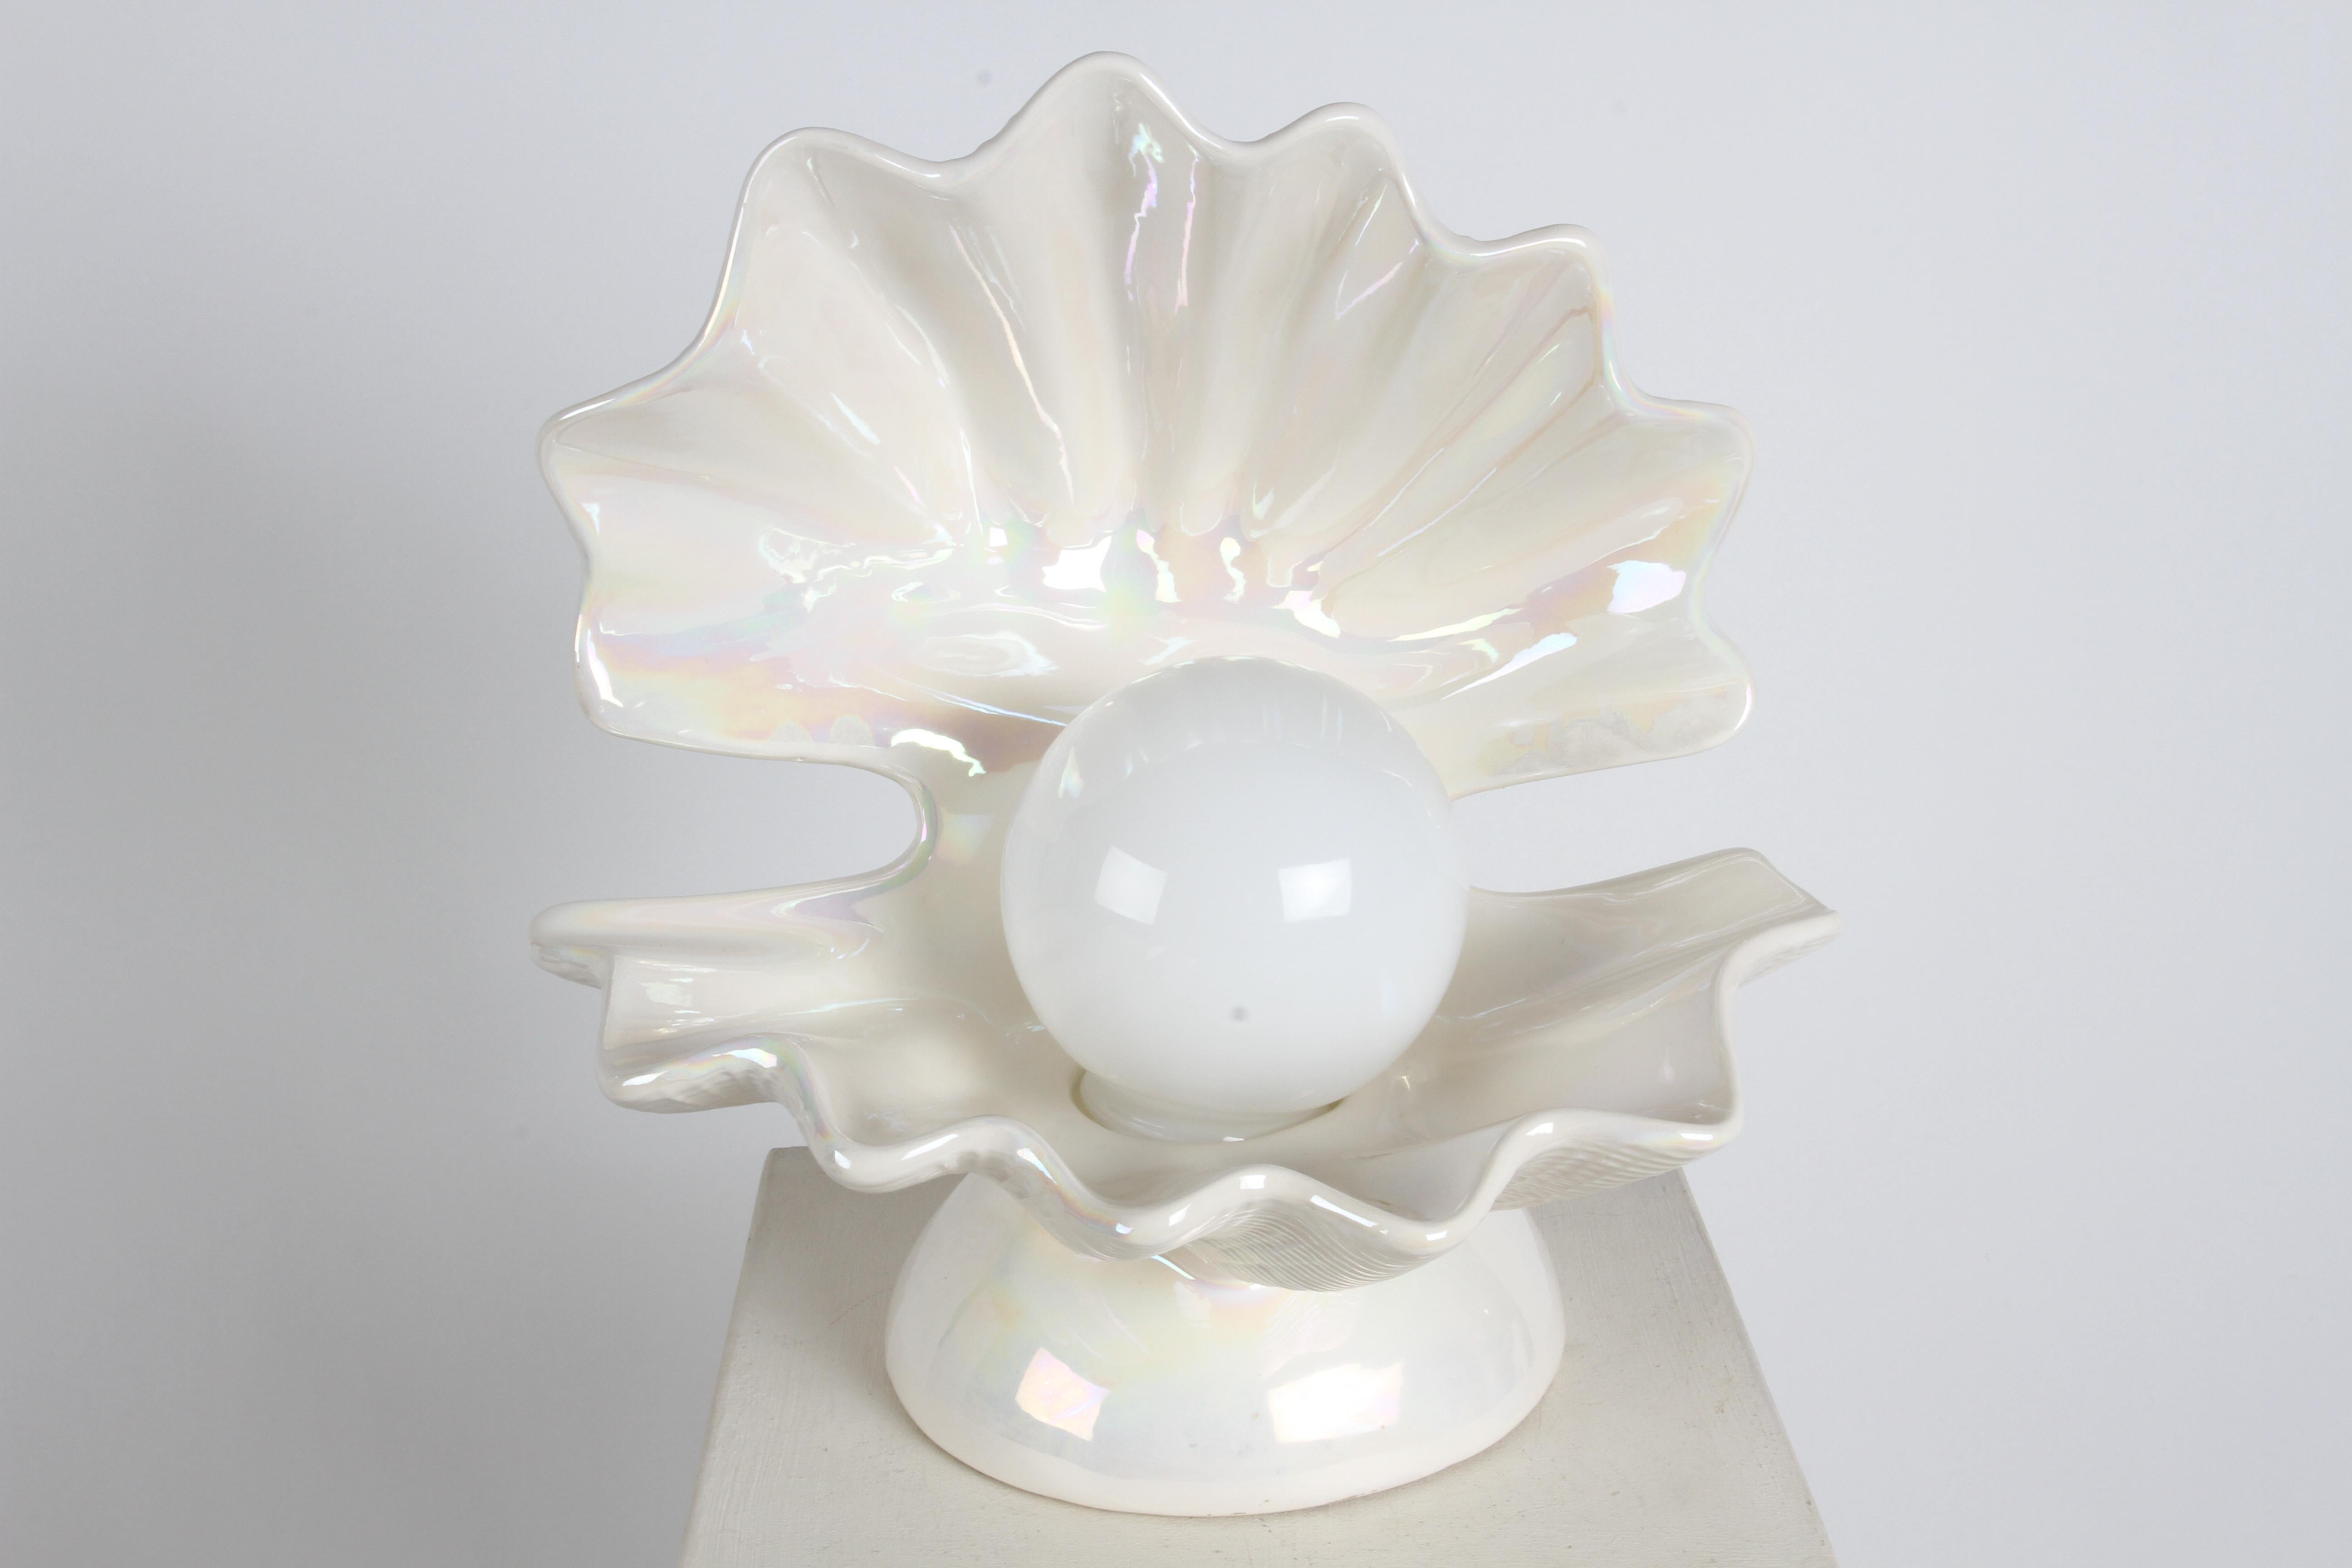  Hollywood Regency style large ceramic form open oyster shell table lamp on round raised pedestal base, in a white Pearlescent glaze,  with white globe as pearl. This lamp is a throw back to the 1920s glamorous Art Deco period. In great original